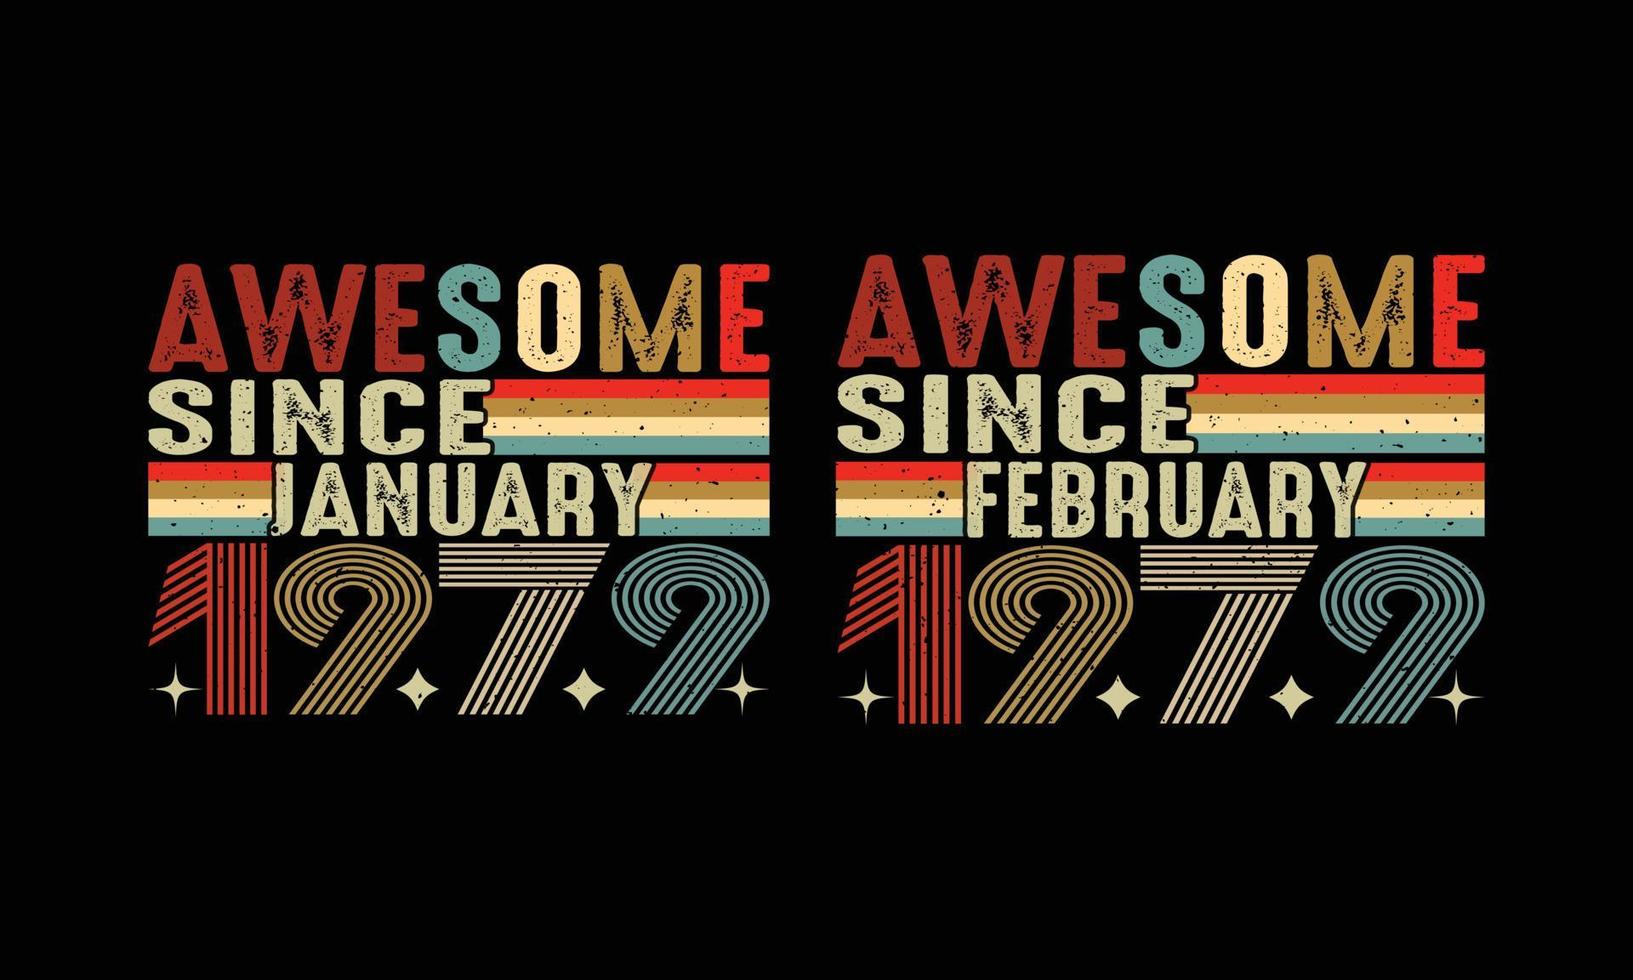 Awesome since January and February-1979 Vintage Shirt Design,Birthday Gift vintage. vector